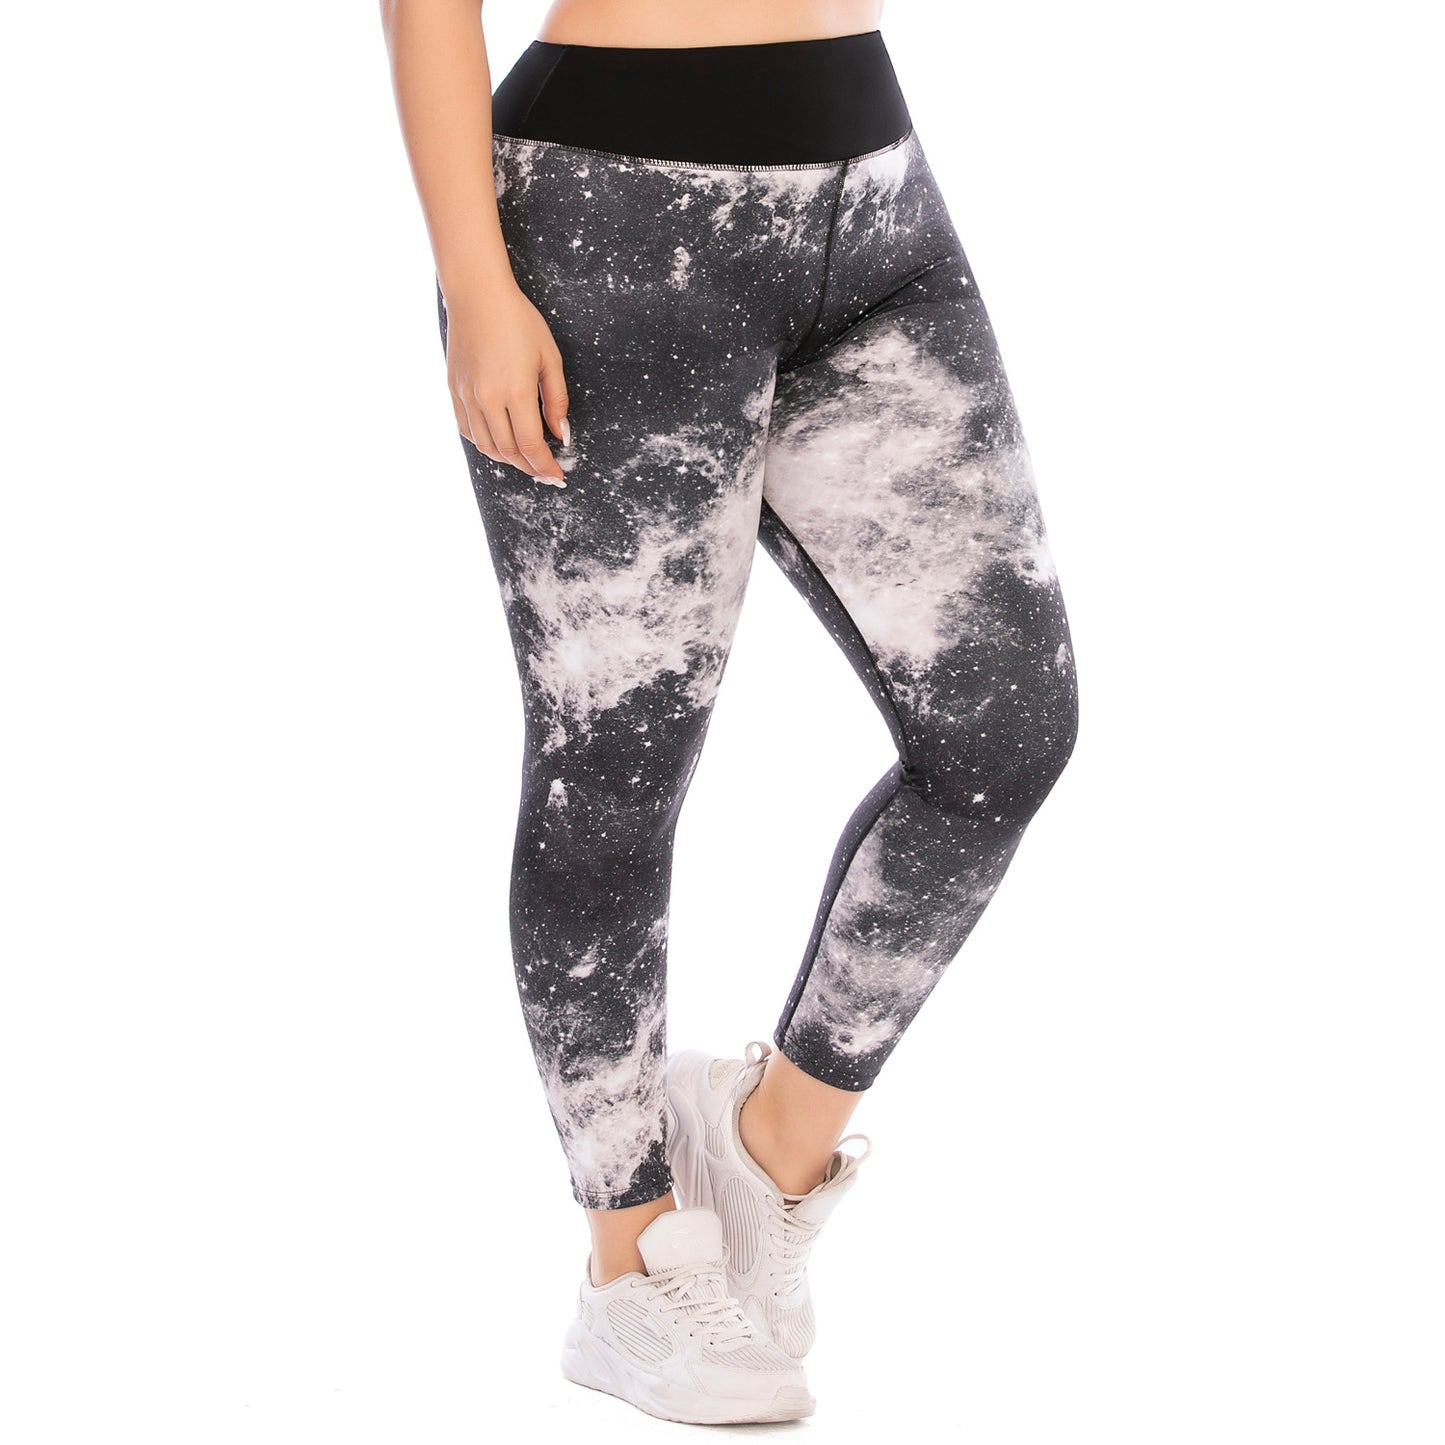 Plus Size Doing Exercise Yoga Suits and Activewear-Leggings-L-Free Shipping at meselling99